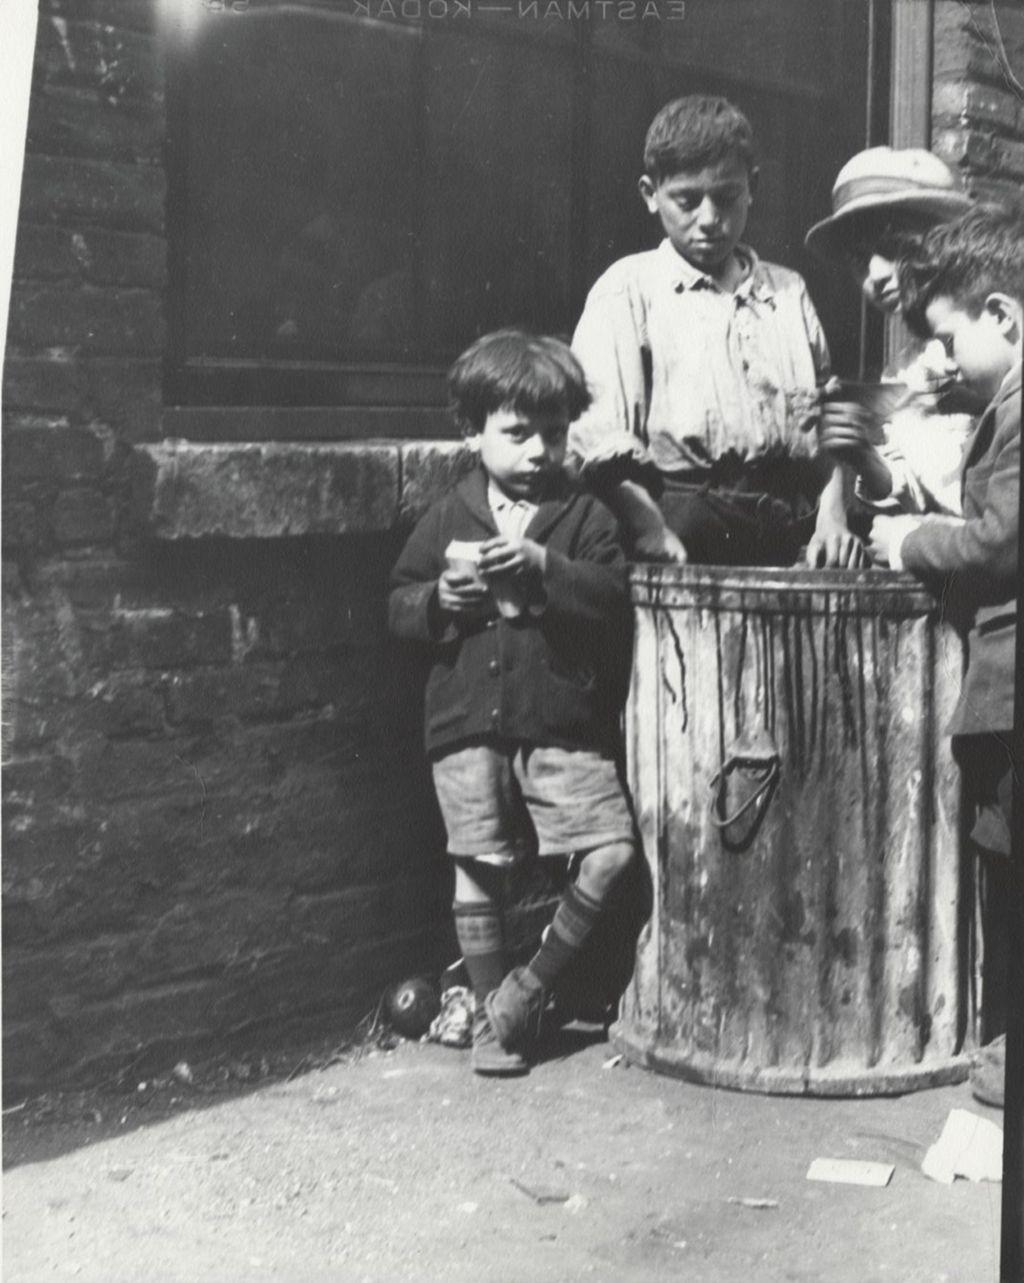 Four boys surround a garbage can in alley